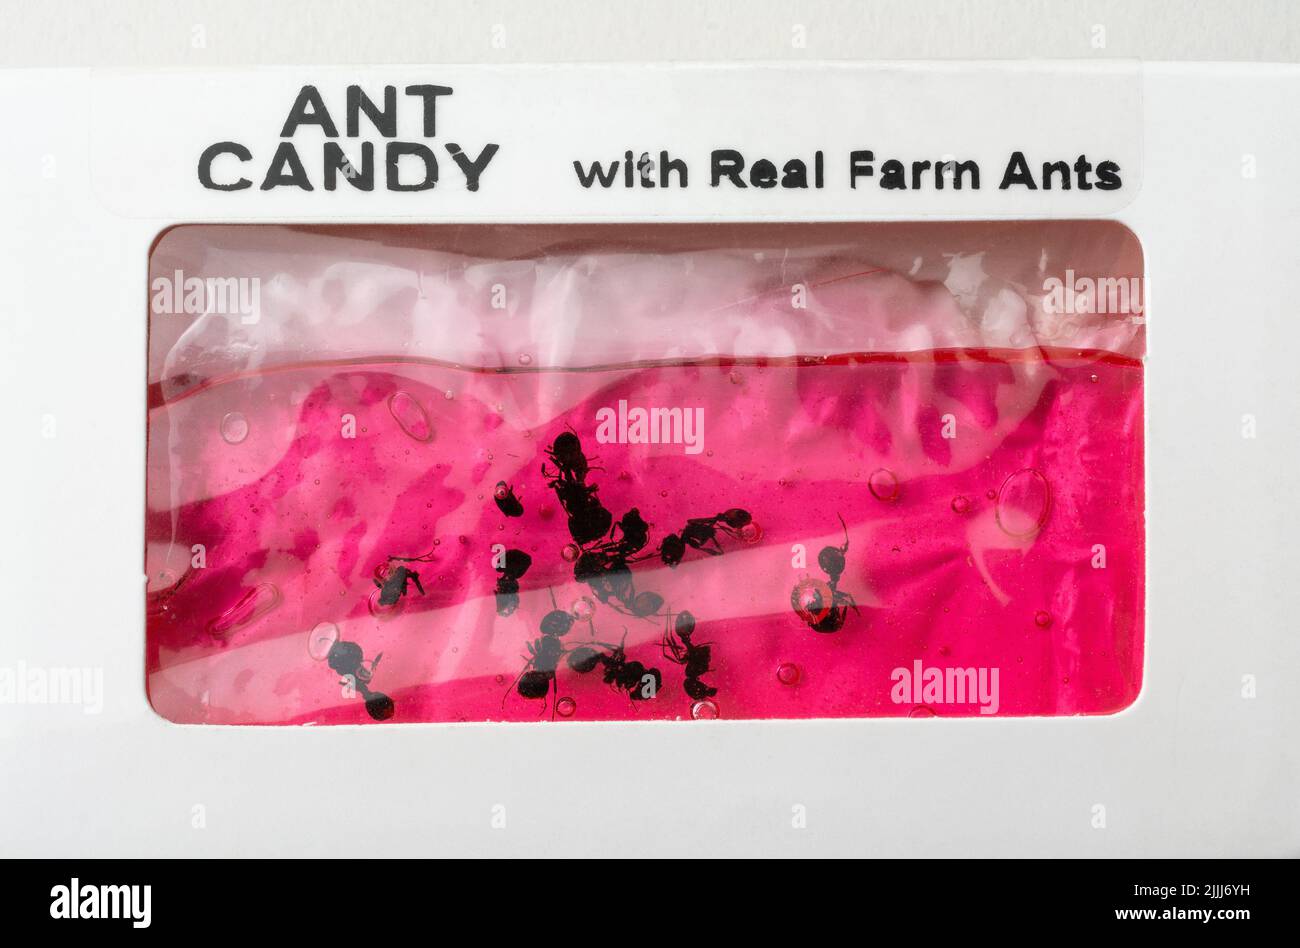 Red Ant Farm candy with real Farm ants Stock Photo